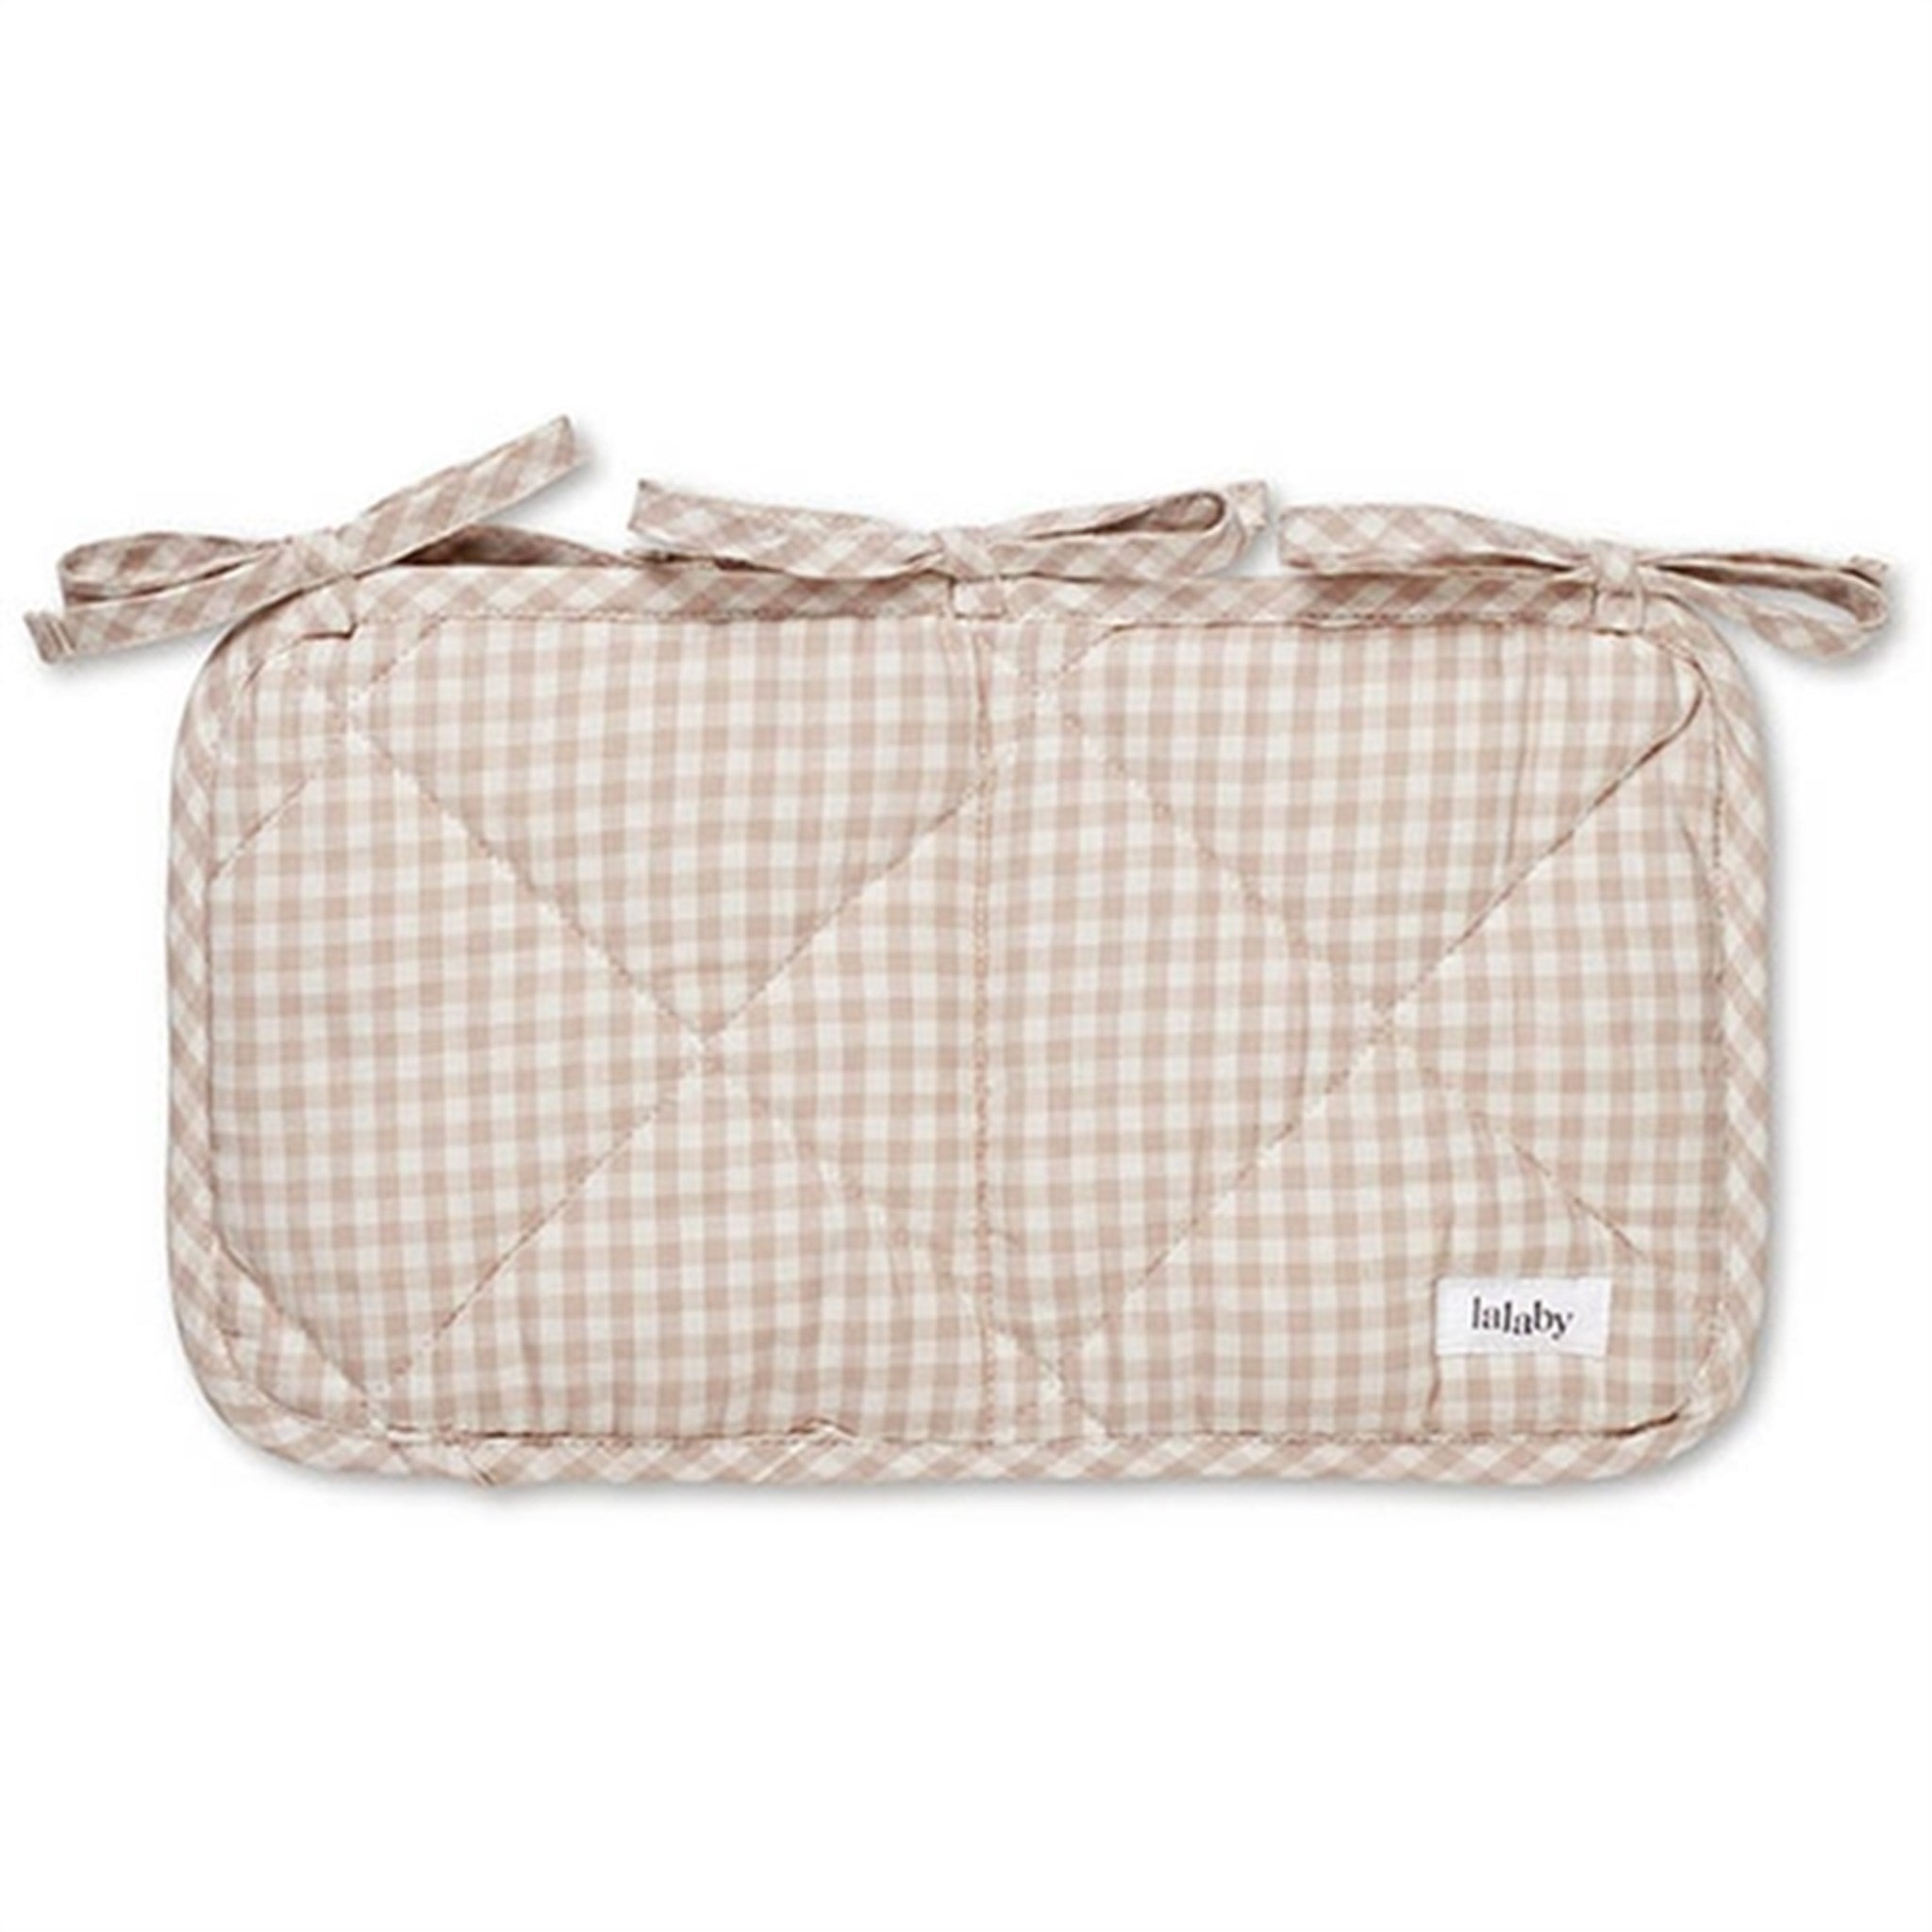 Lalaby Bed Pocket Beige Gingham